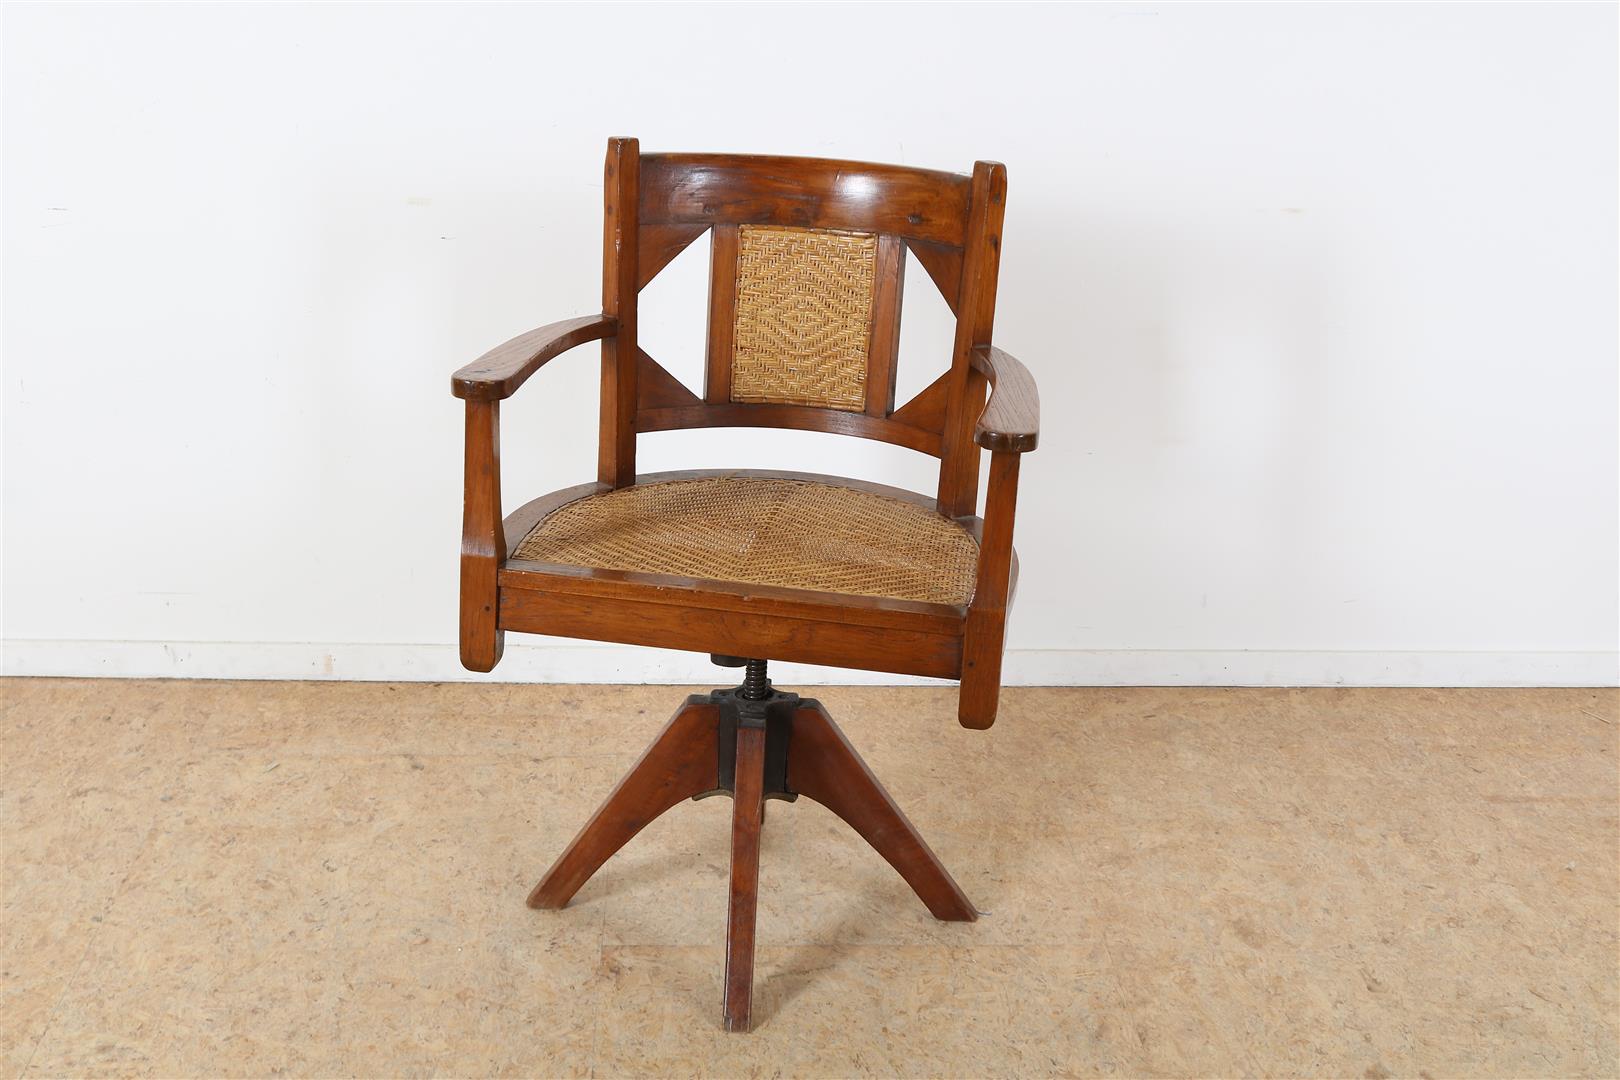 Teak Art Deco office chair with woven wicker seat, Indonesia ca. 1925.